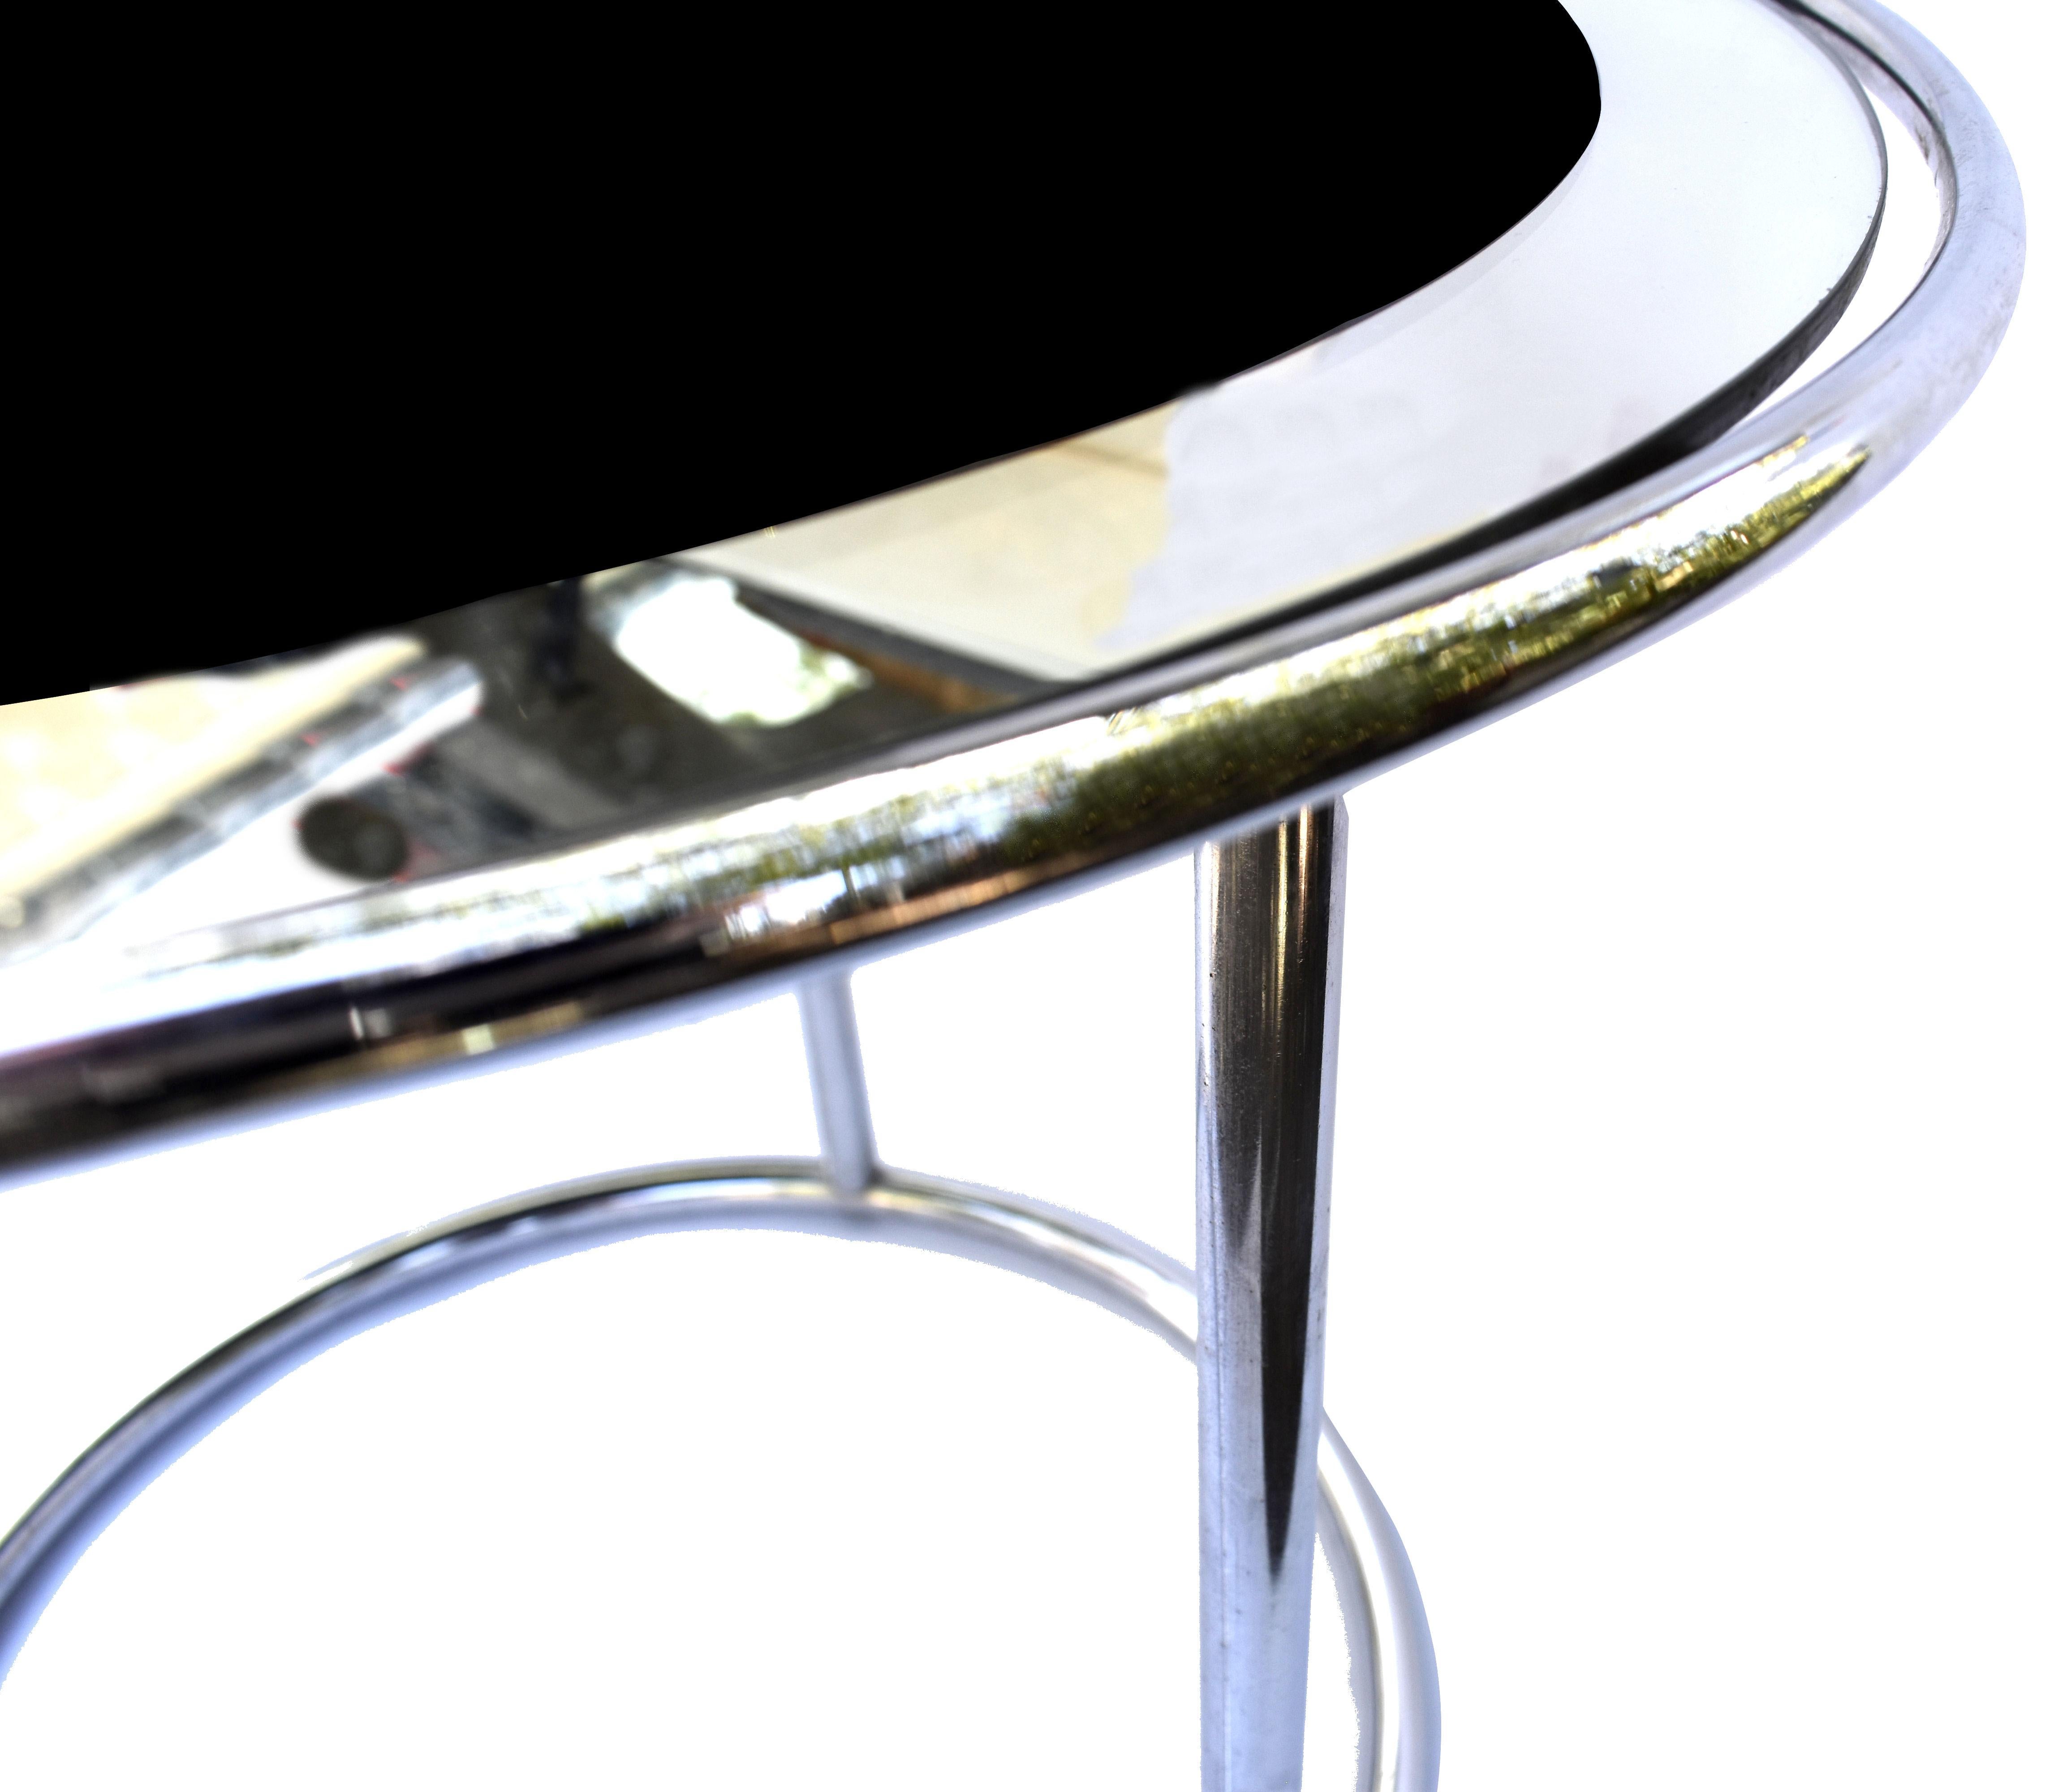 Art Deco Chrome & Glass Modernist Occasional Cocktail Table, English, C1930's For Sale 1